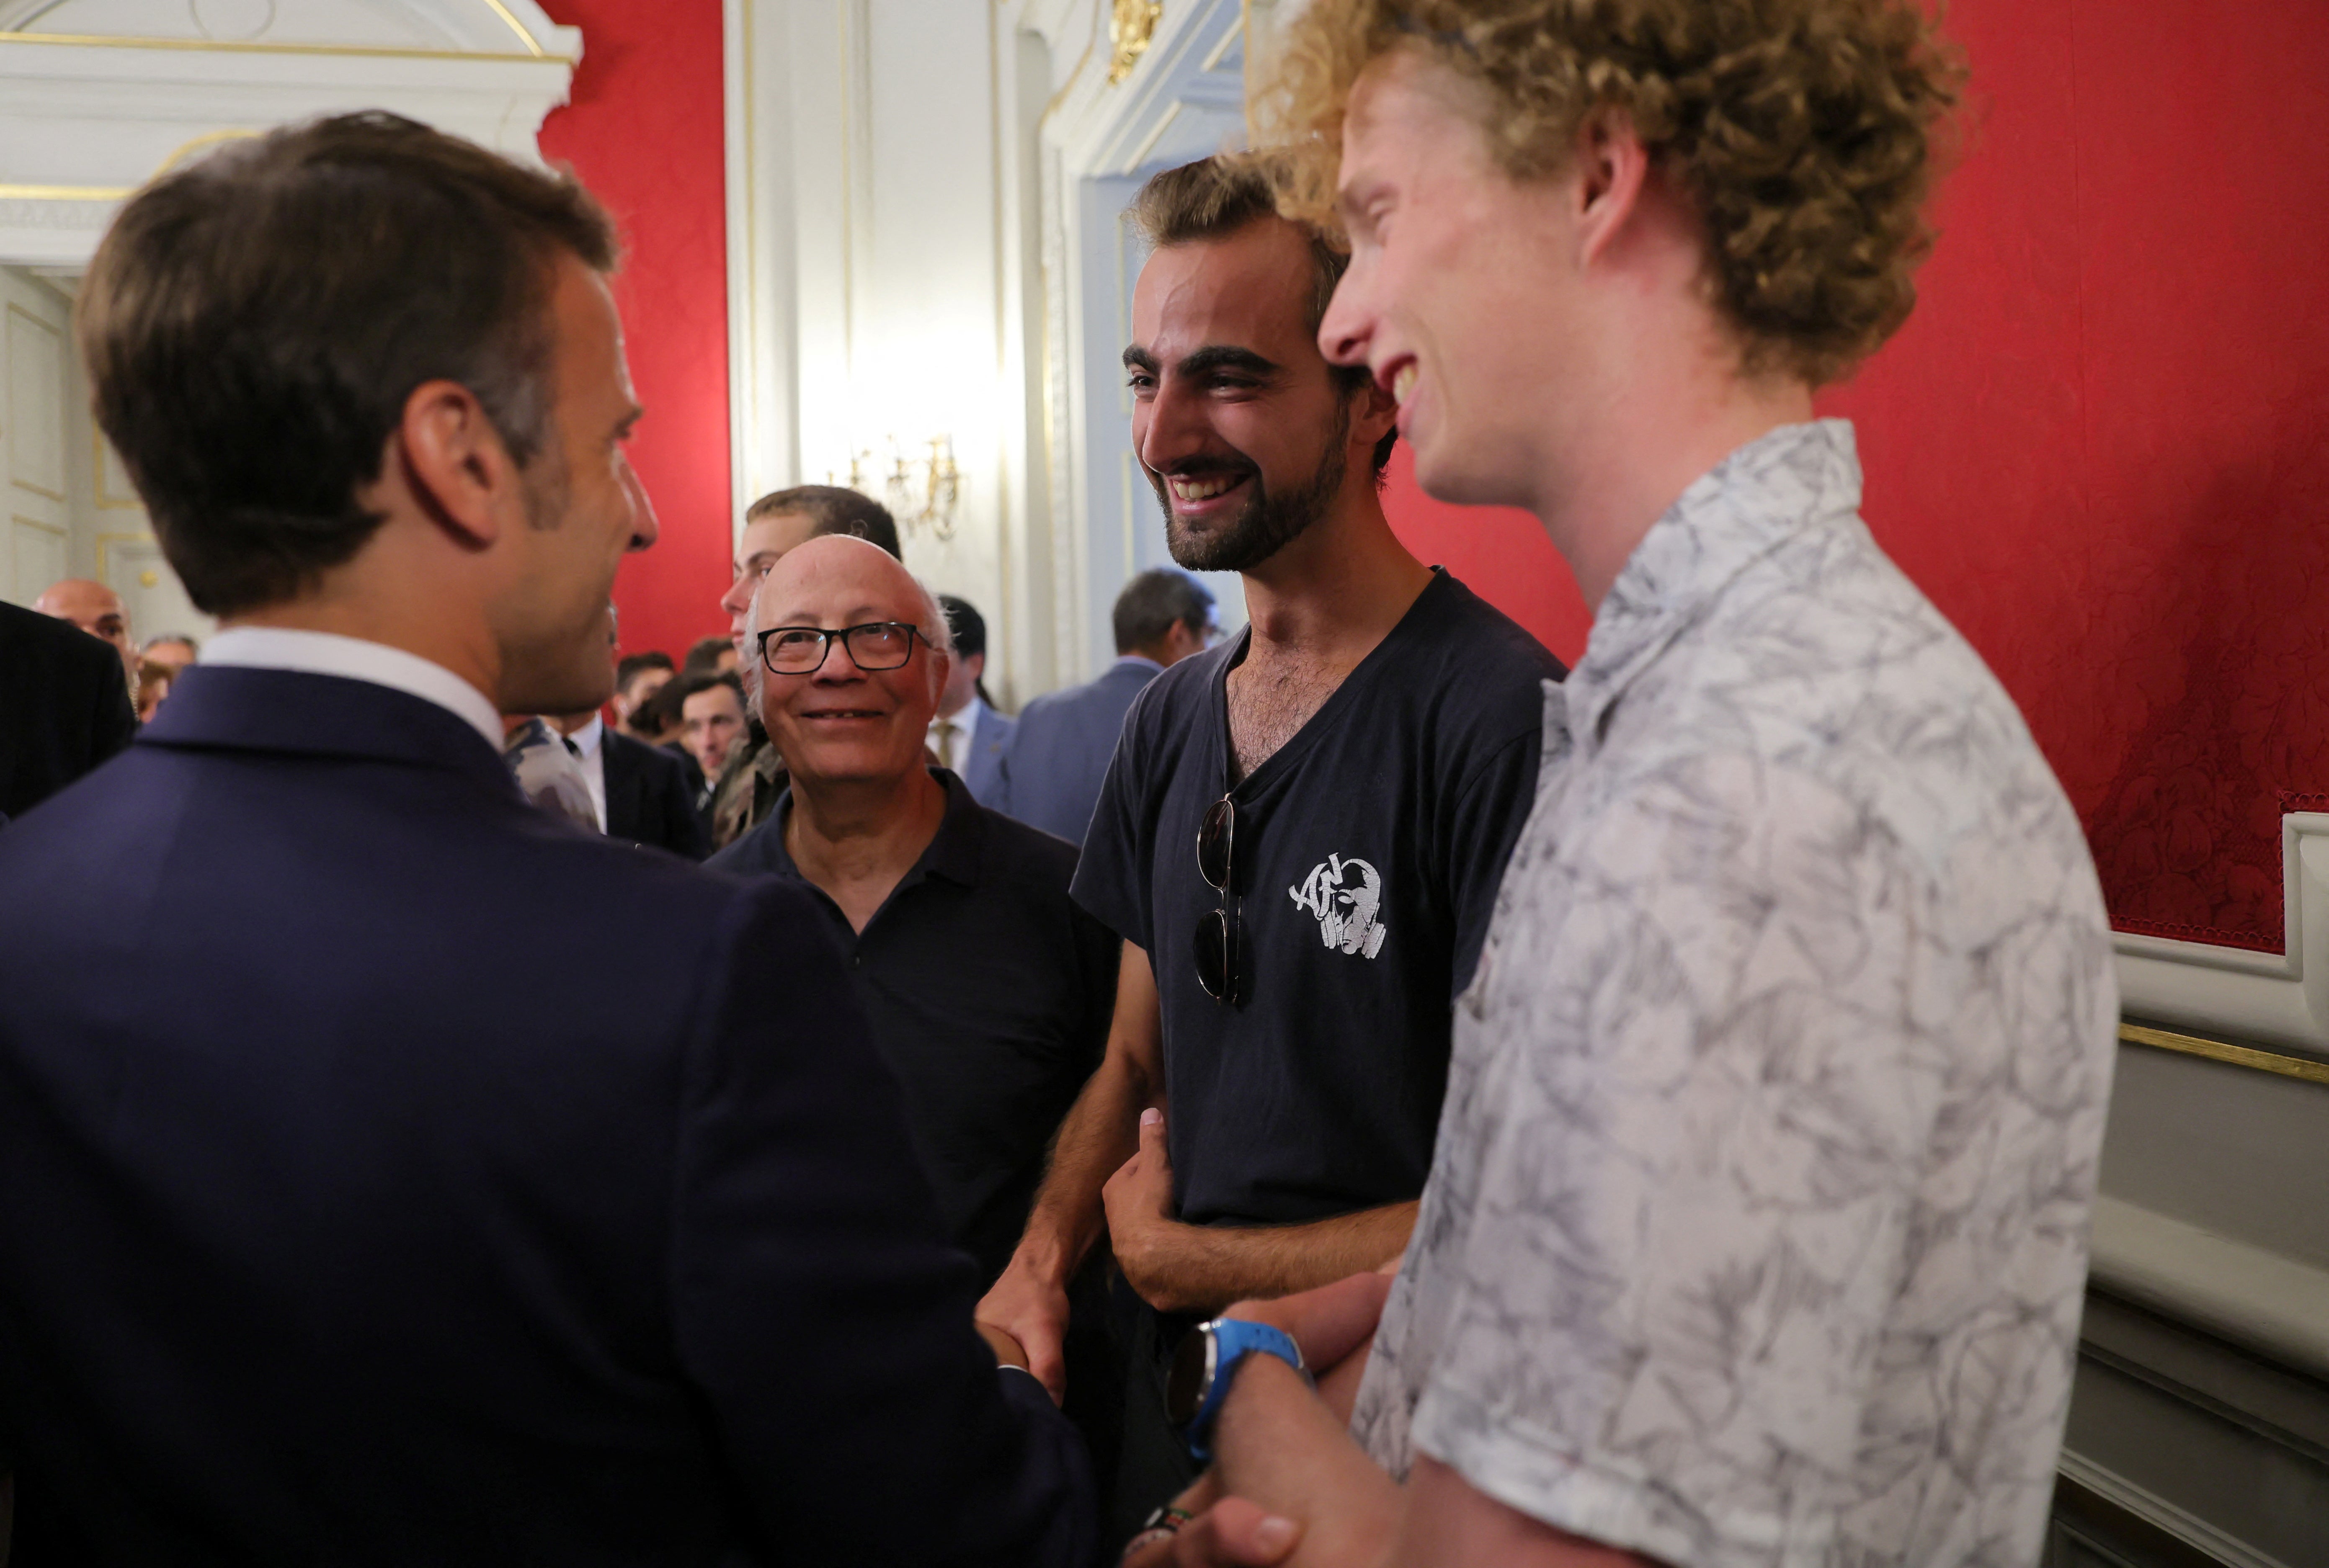 Emmanuel Macron meets Henri, the 24-year-old ‘backpack hero’, his friend Lilian and Youssouf, who suffered minor stab wounds as he tried to intercept the suspect